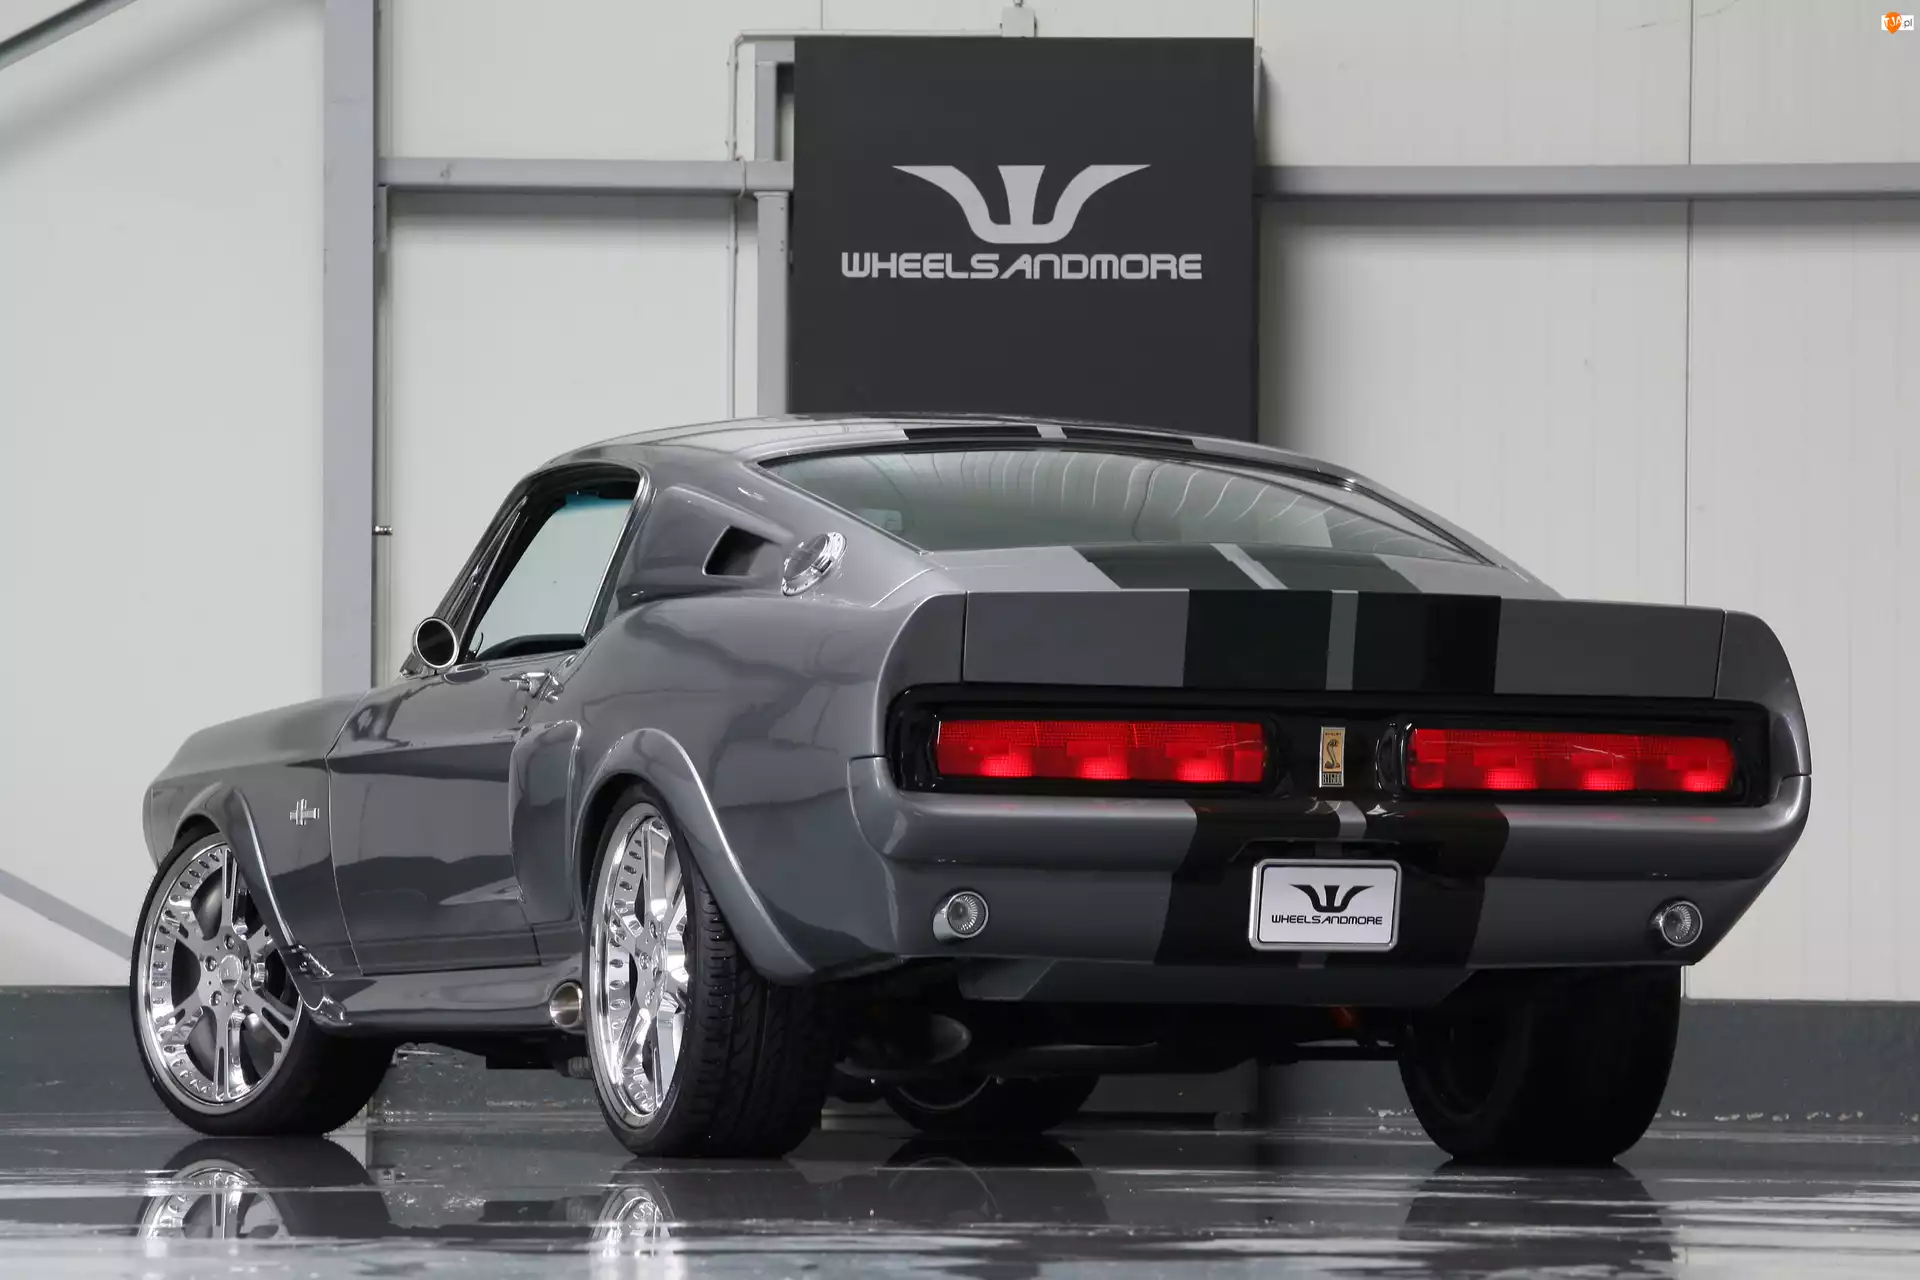 Ford Mustang, Shelby GT500 Eleonor